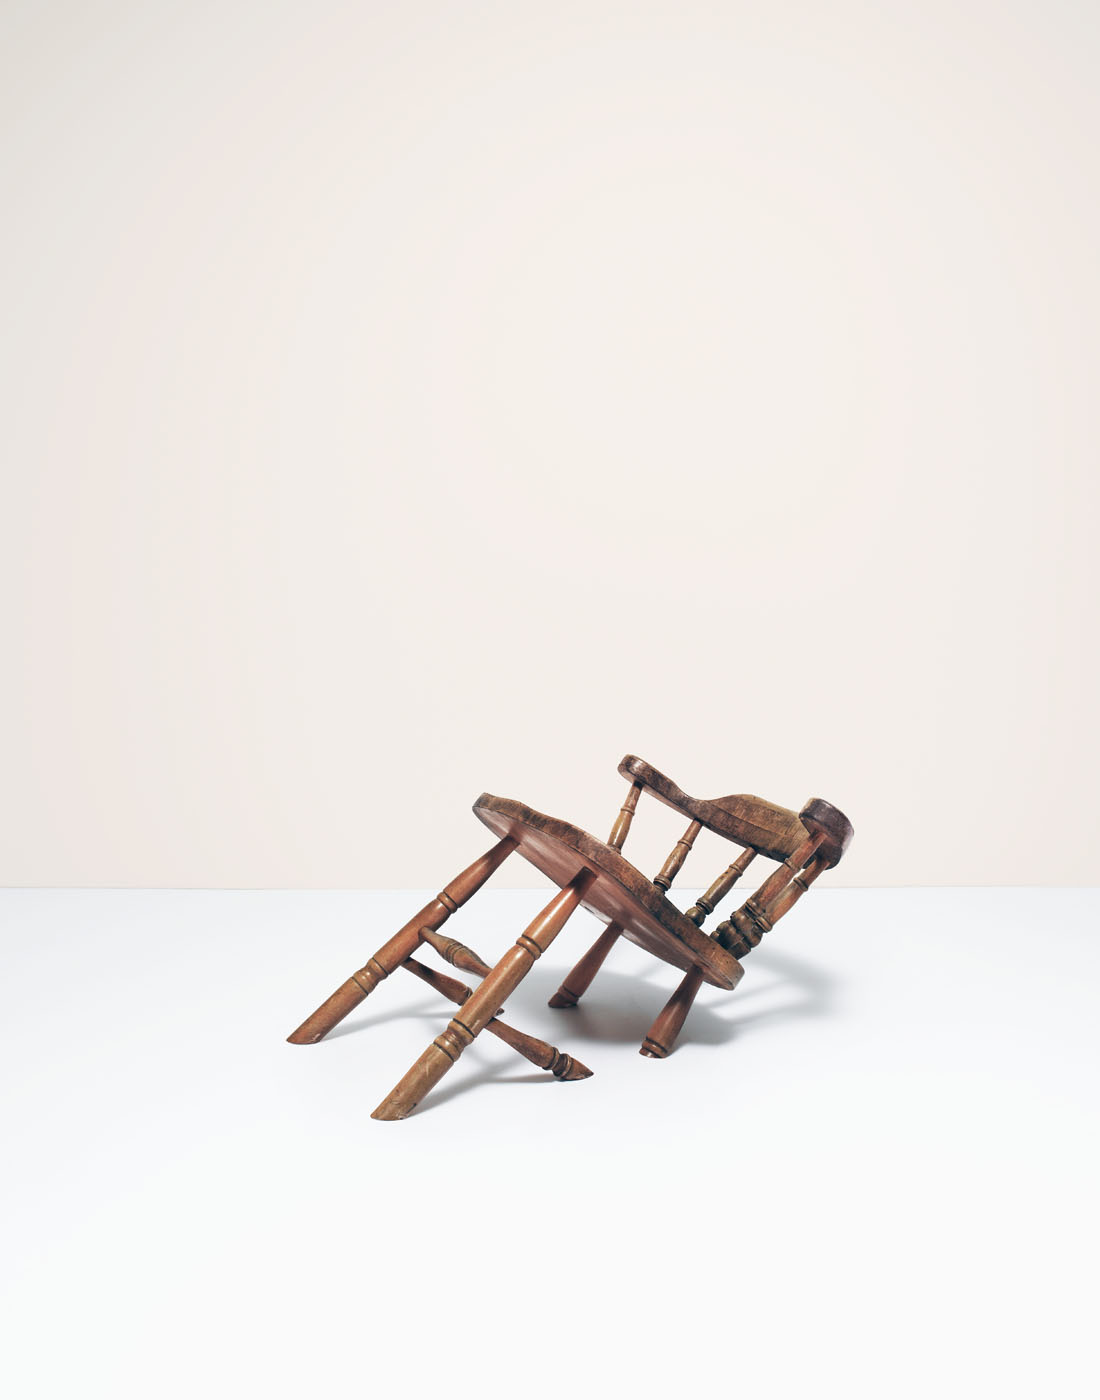 Sinking furniture by Alexander Kent London based still life and product photographer.